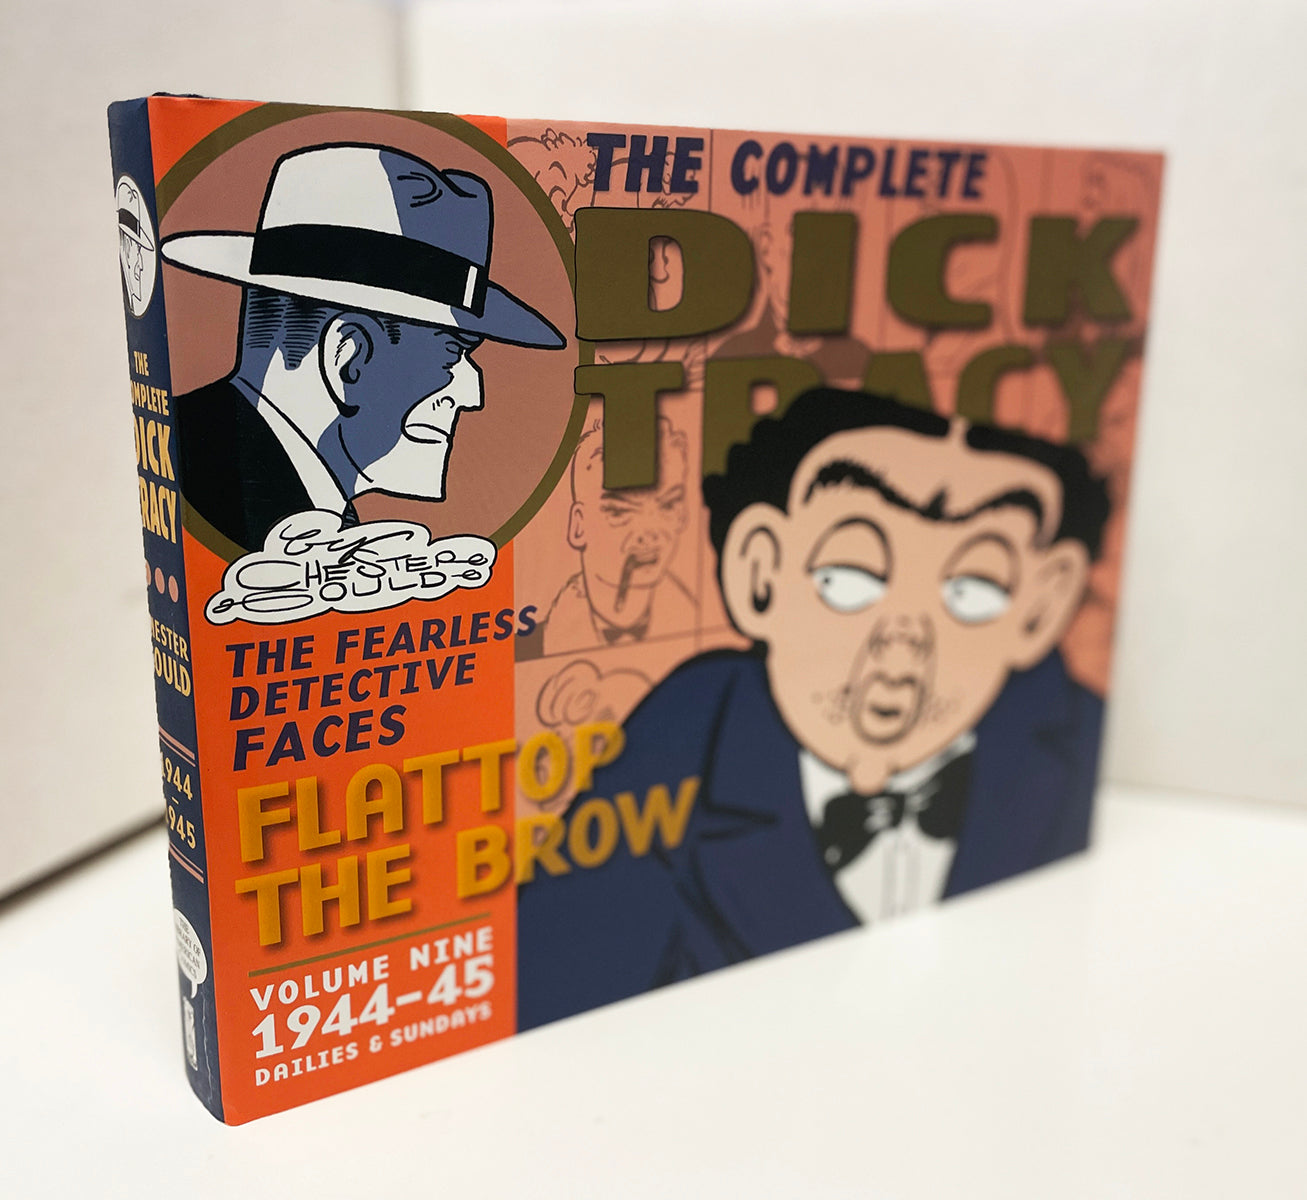 The Complete Dick Tracy Vol. 9 (IDW)